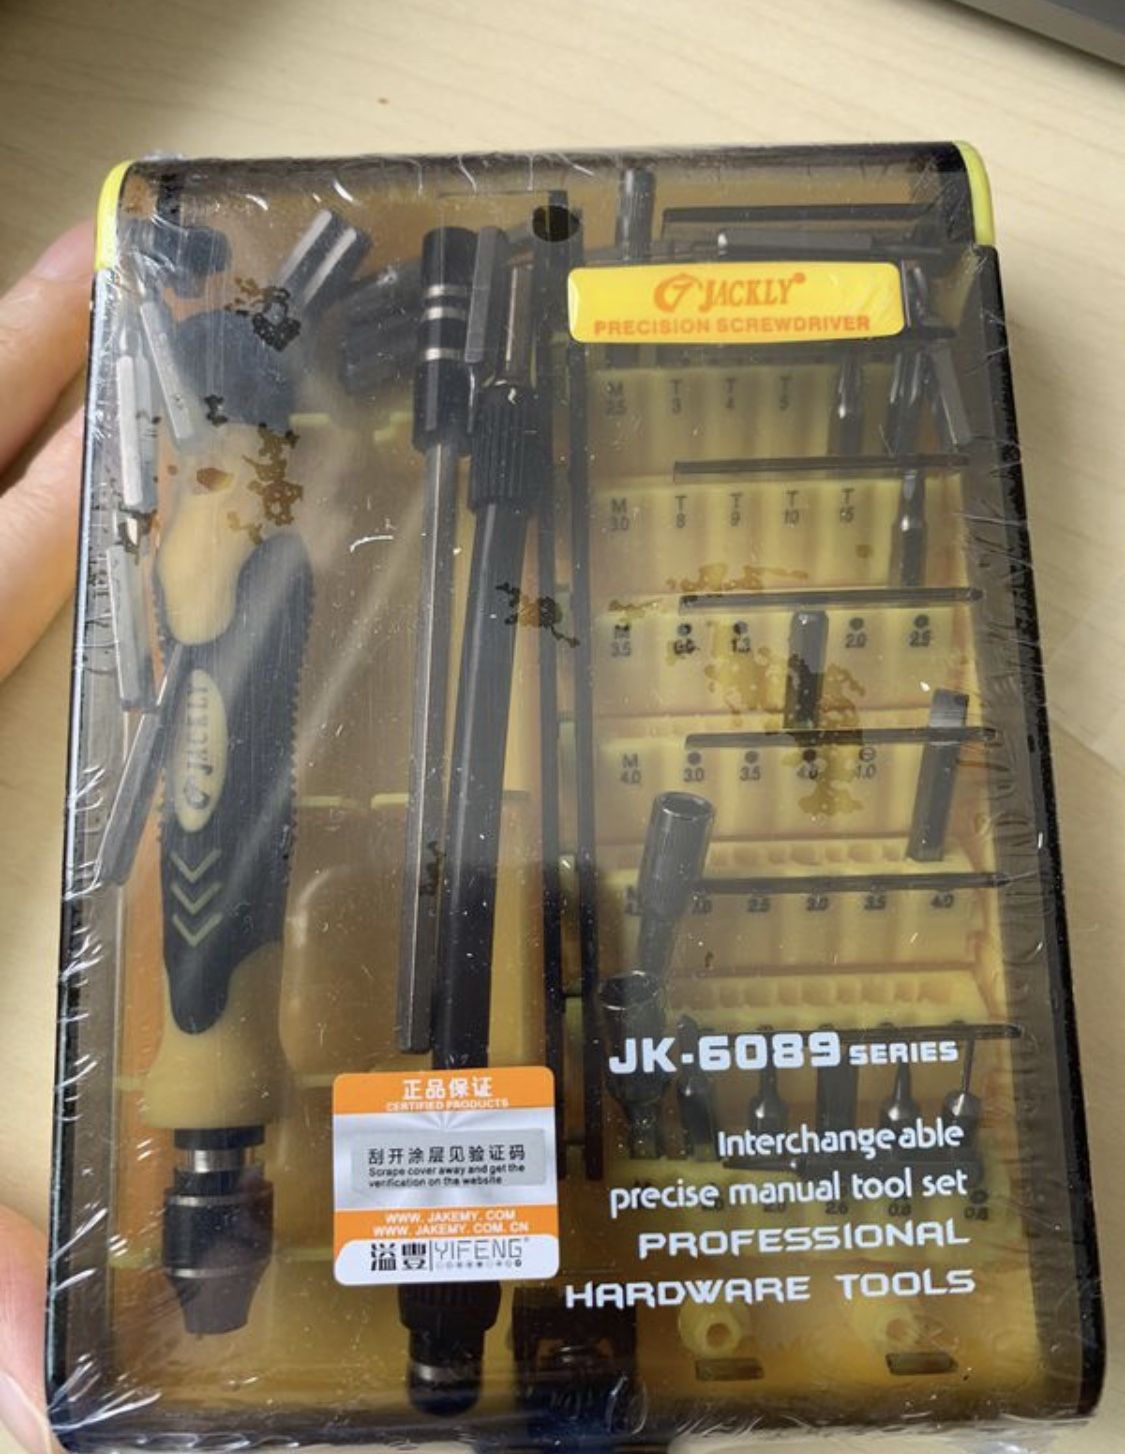 Mobile Jackly 45 in 1 Pro Portable Opening Tool Precision Screwdriver Kit with Flexible Extension Pliant Rod (6089C)